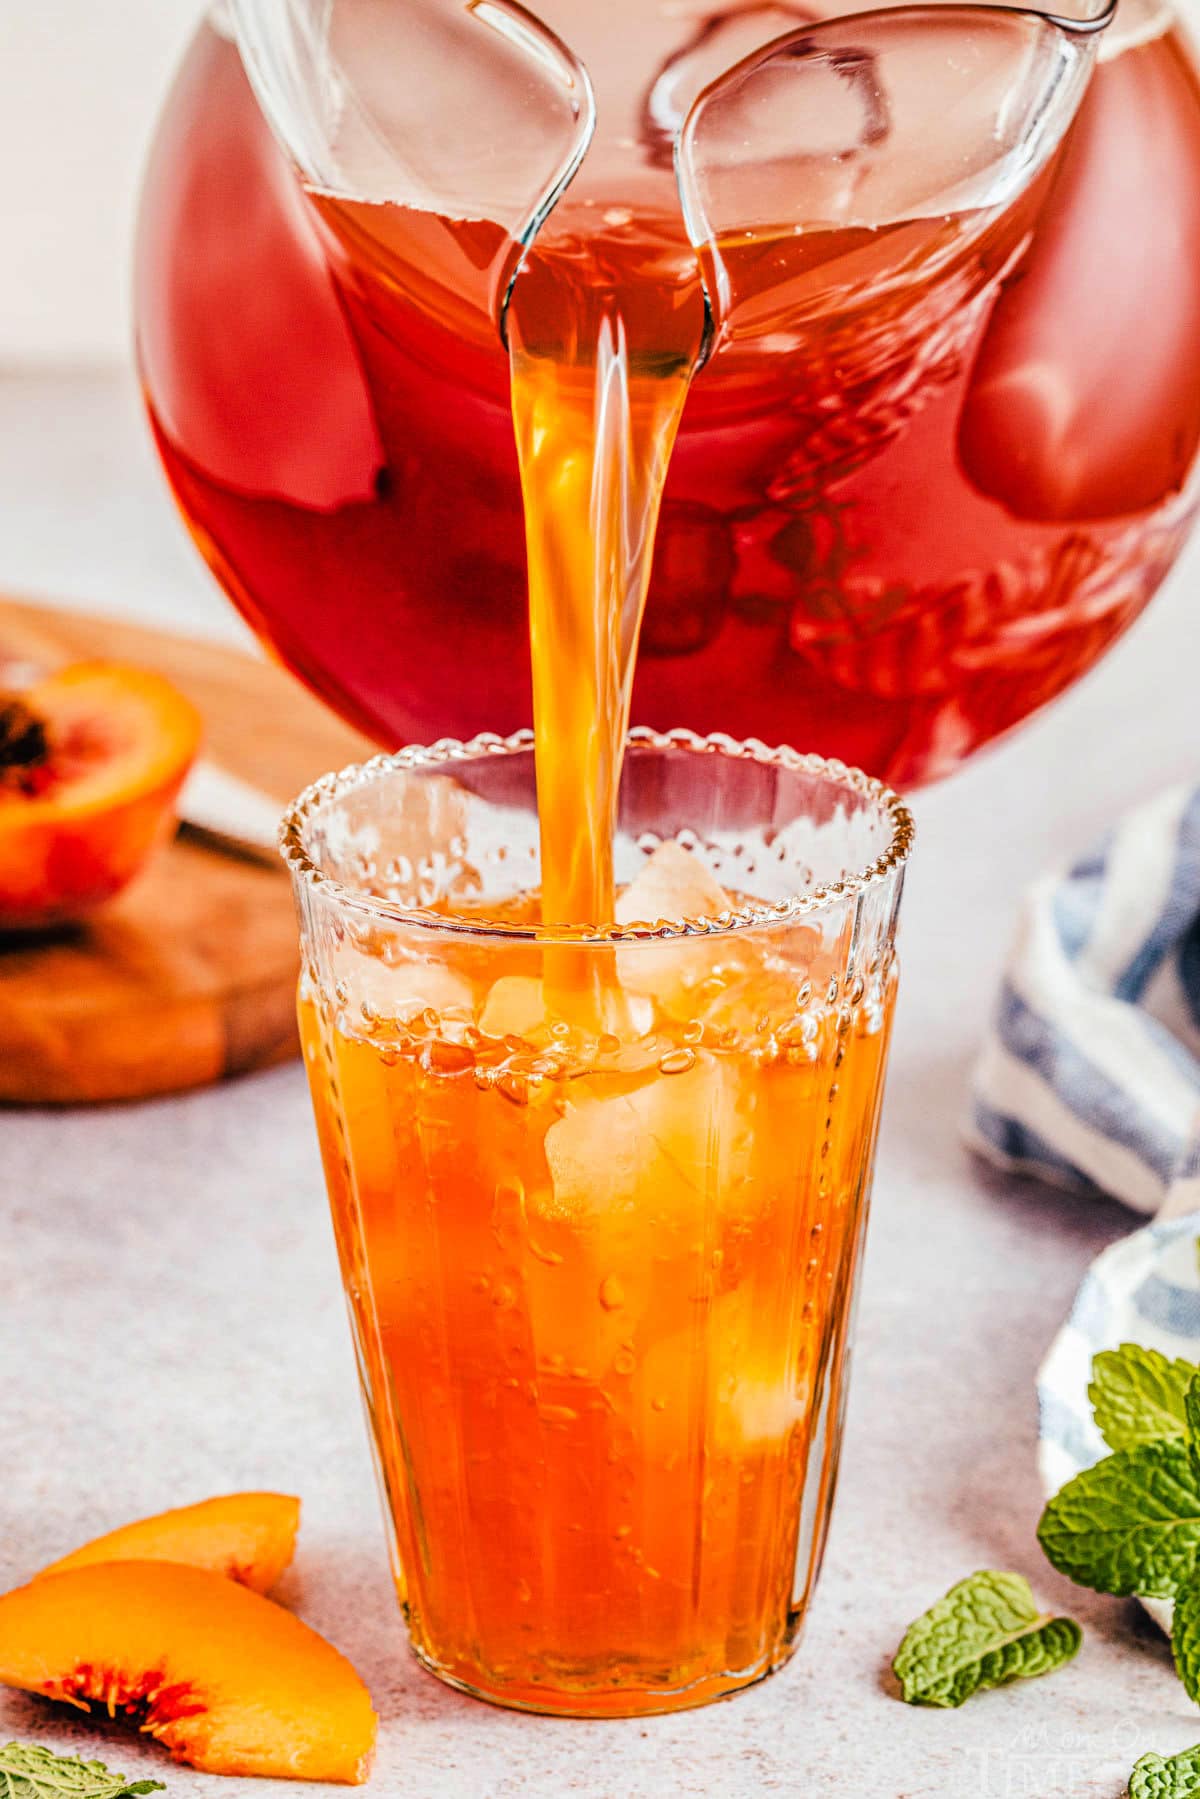 Large pitcher of peach tea being poured into a tall glass with ice.